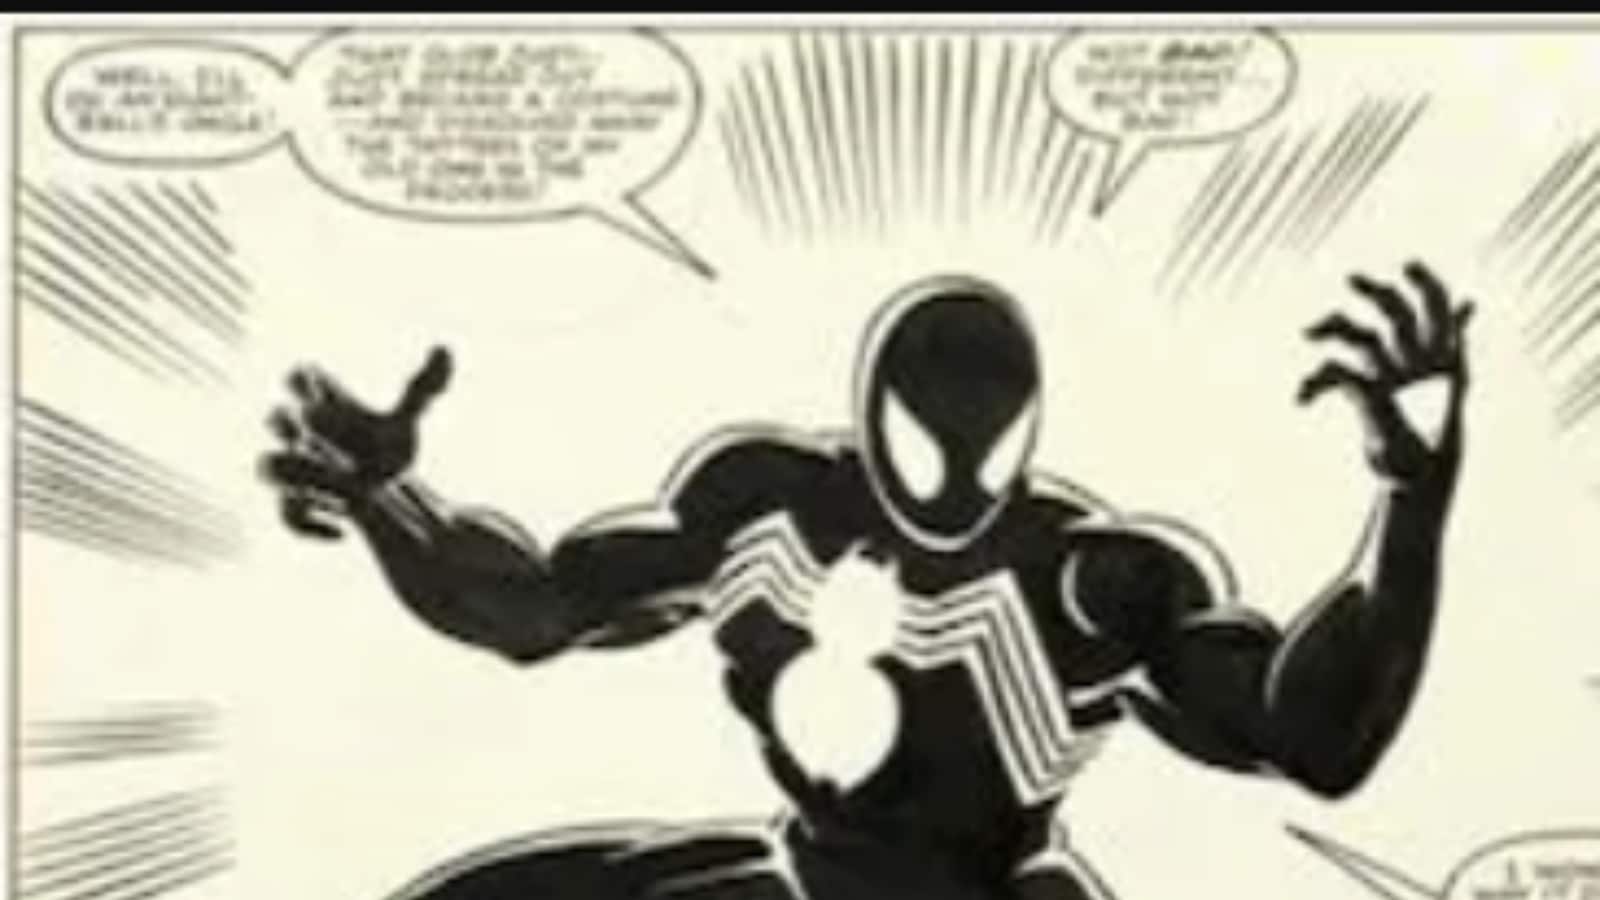 Spider-man Artwork from 1984 Comic Page Sells for Record Rs 24 Crore Bidding  in Dallas